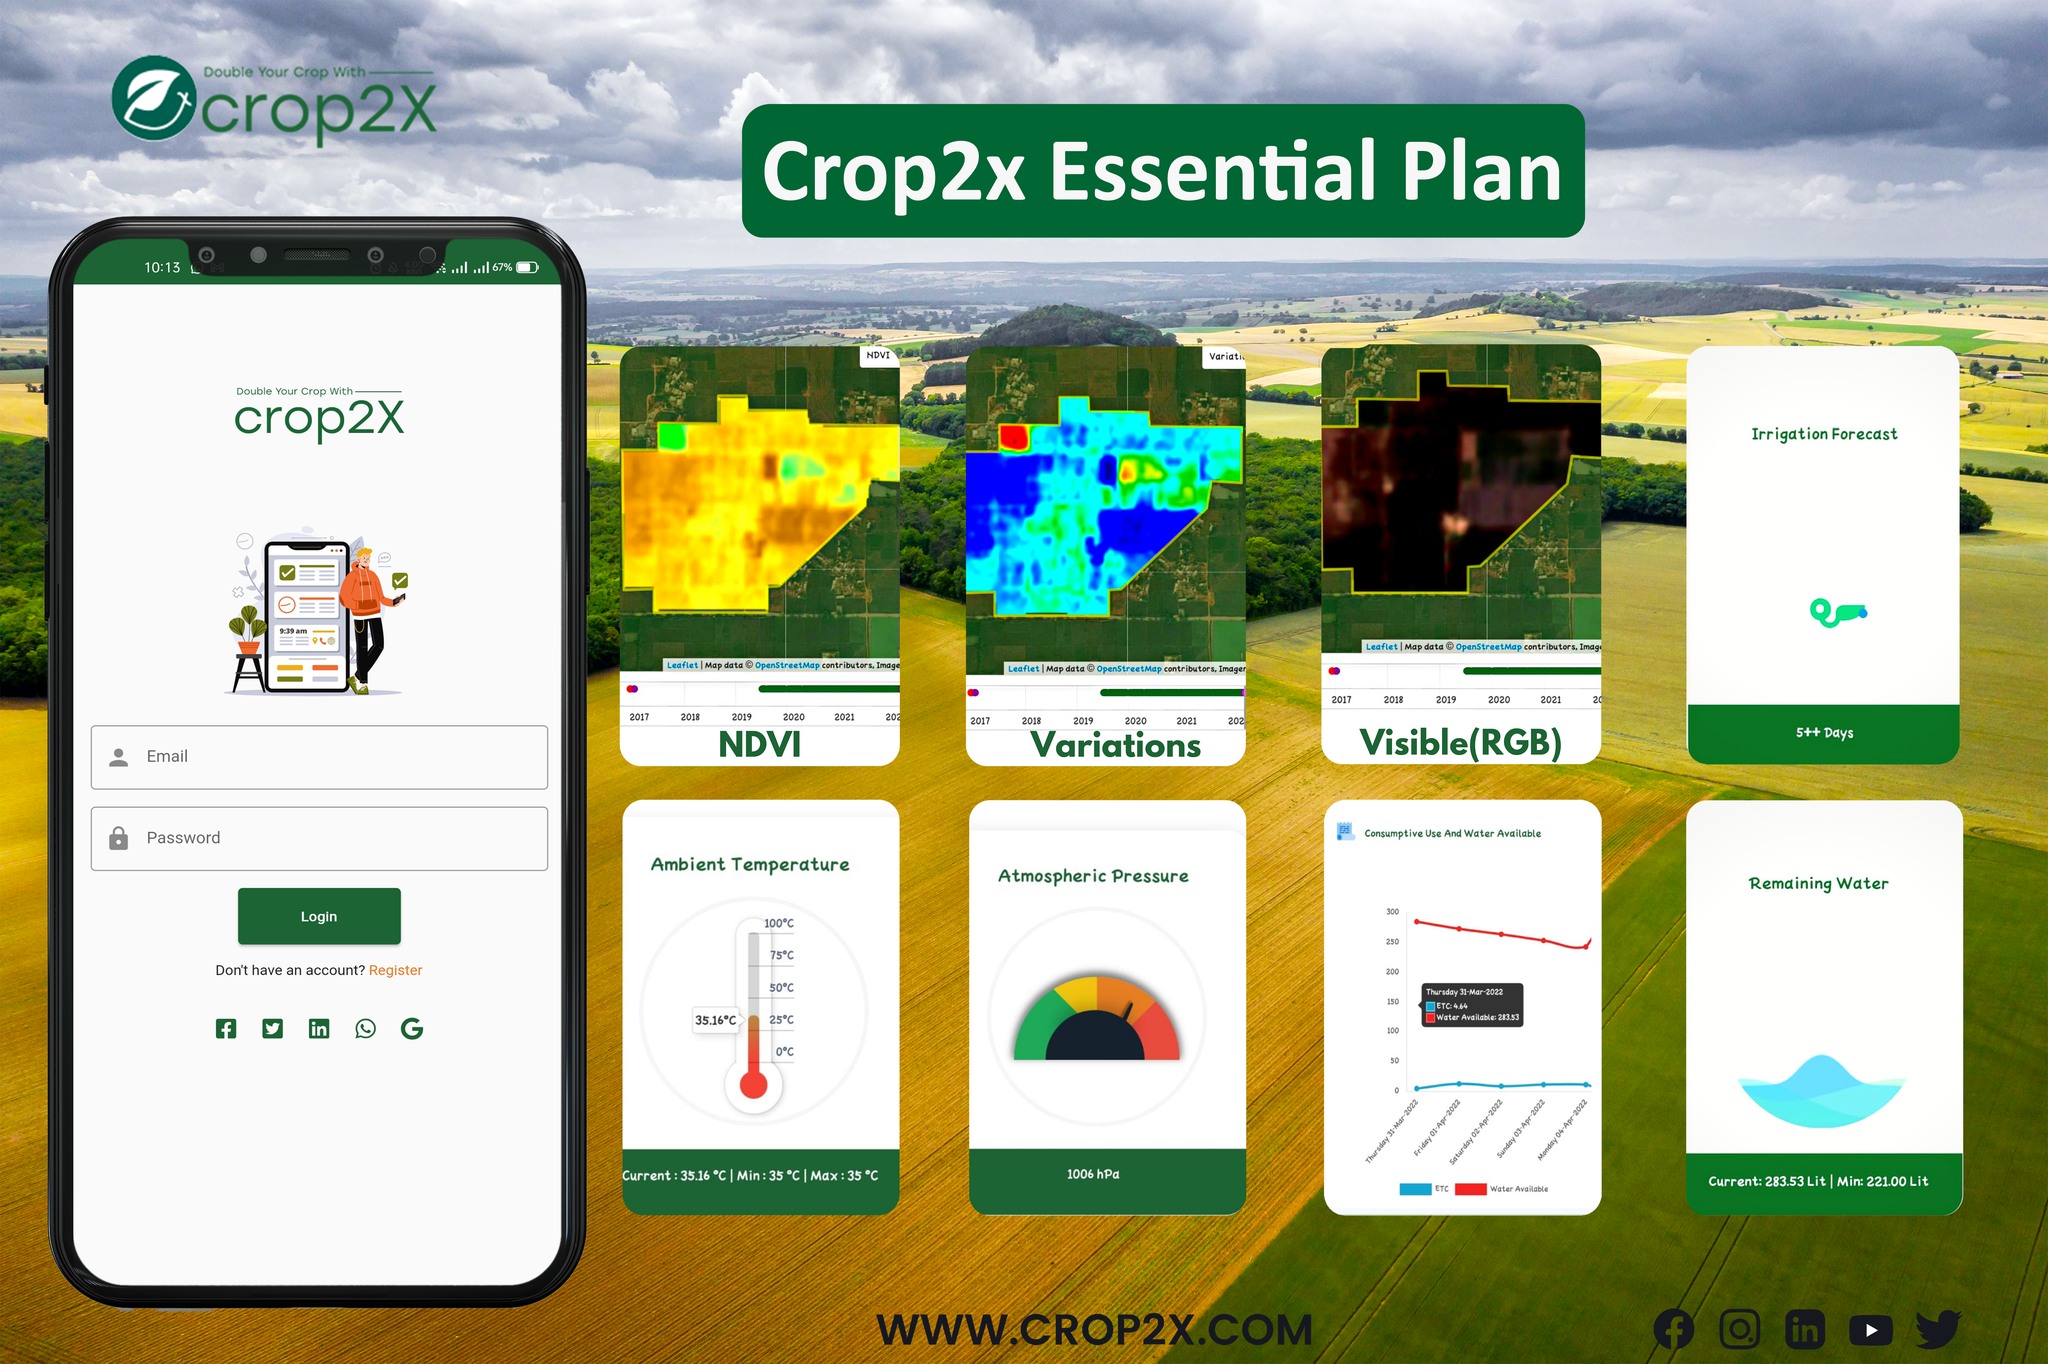  Crop2x Mobile Platform Uses Satellite Imagery to Track Crop Health